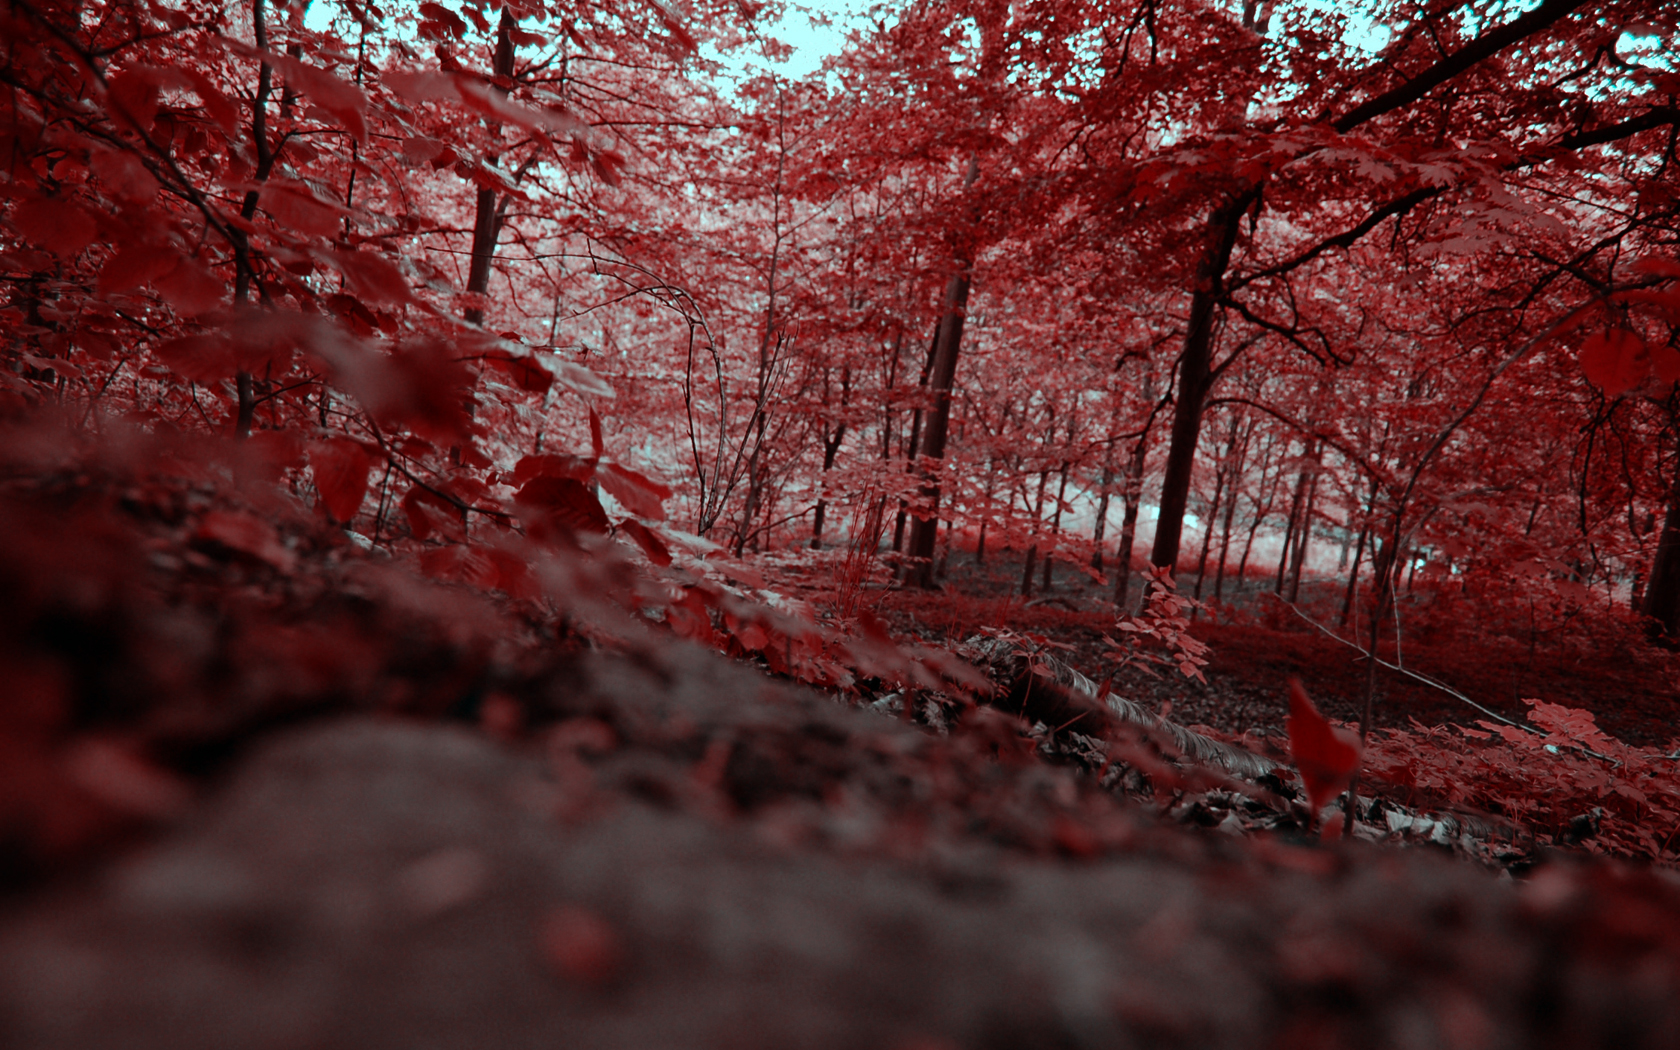 High definition desktop wallpaper featuring a vibrant red forest leaf.